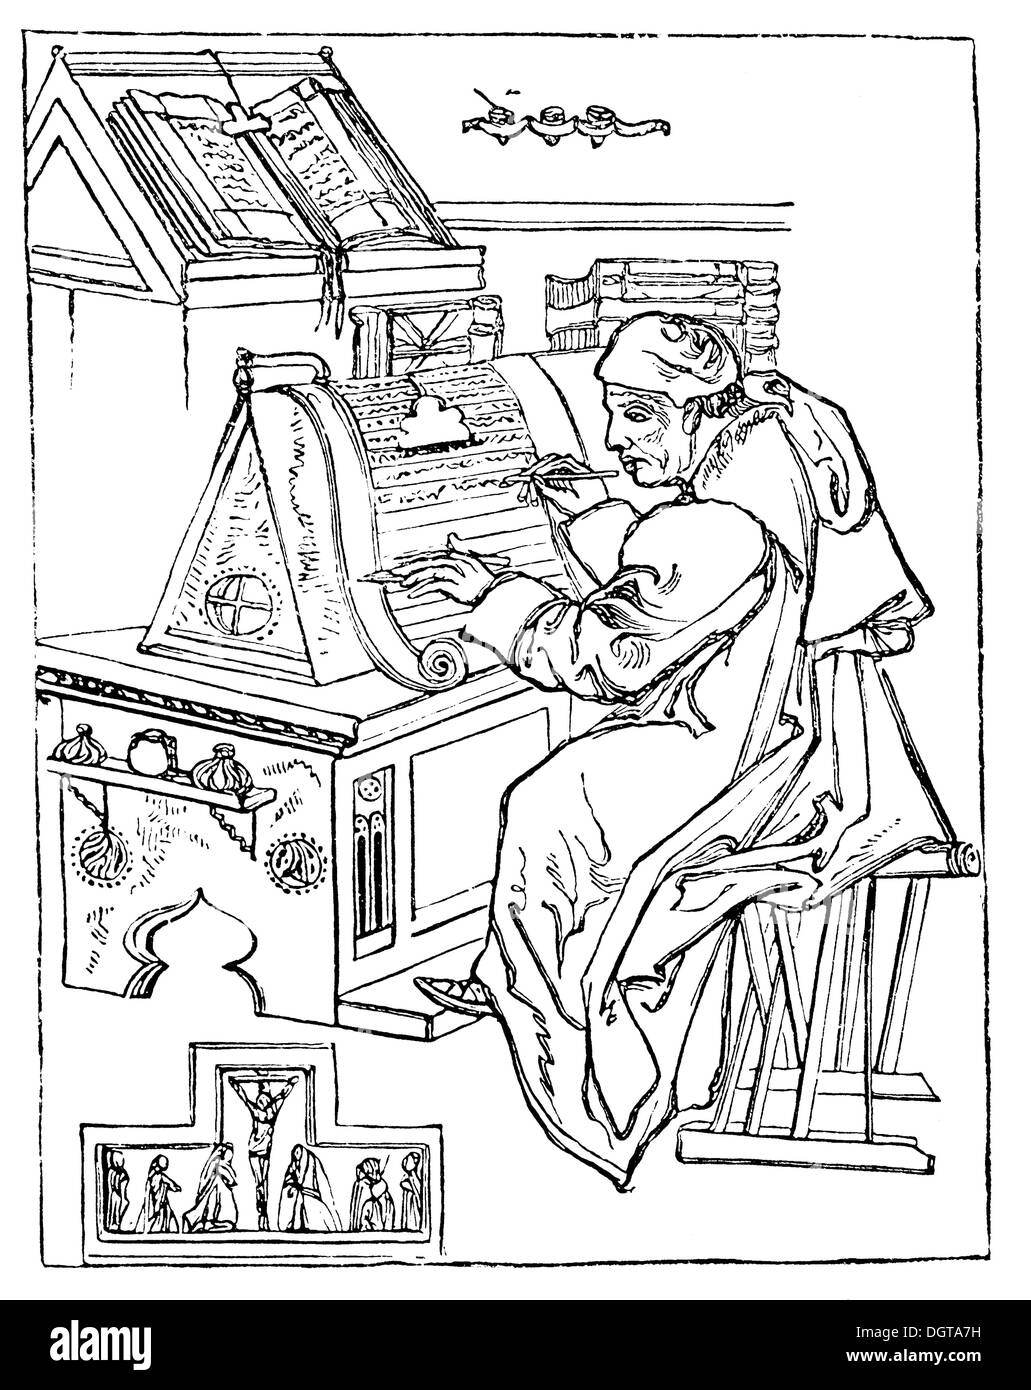 Monk writing in his cubicle, medieval manuscripts, historical image from History of German Literature from 1885 Stock Photo